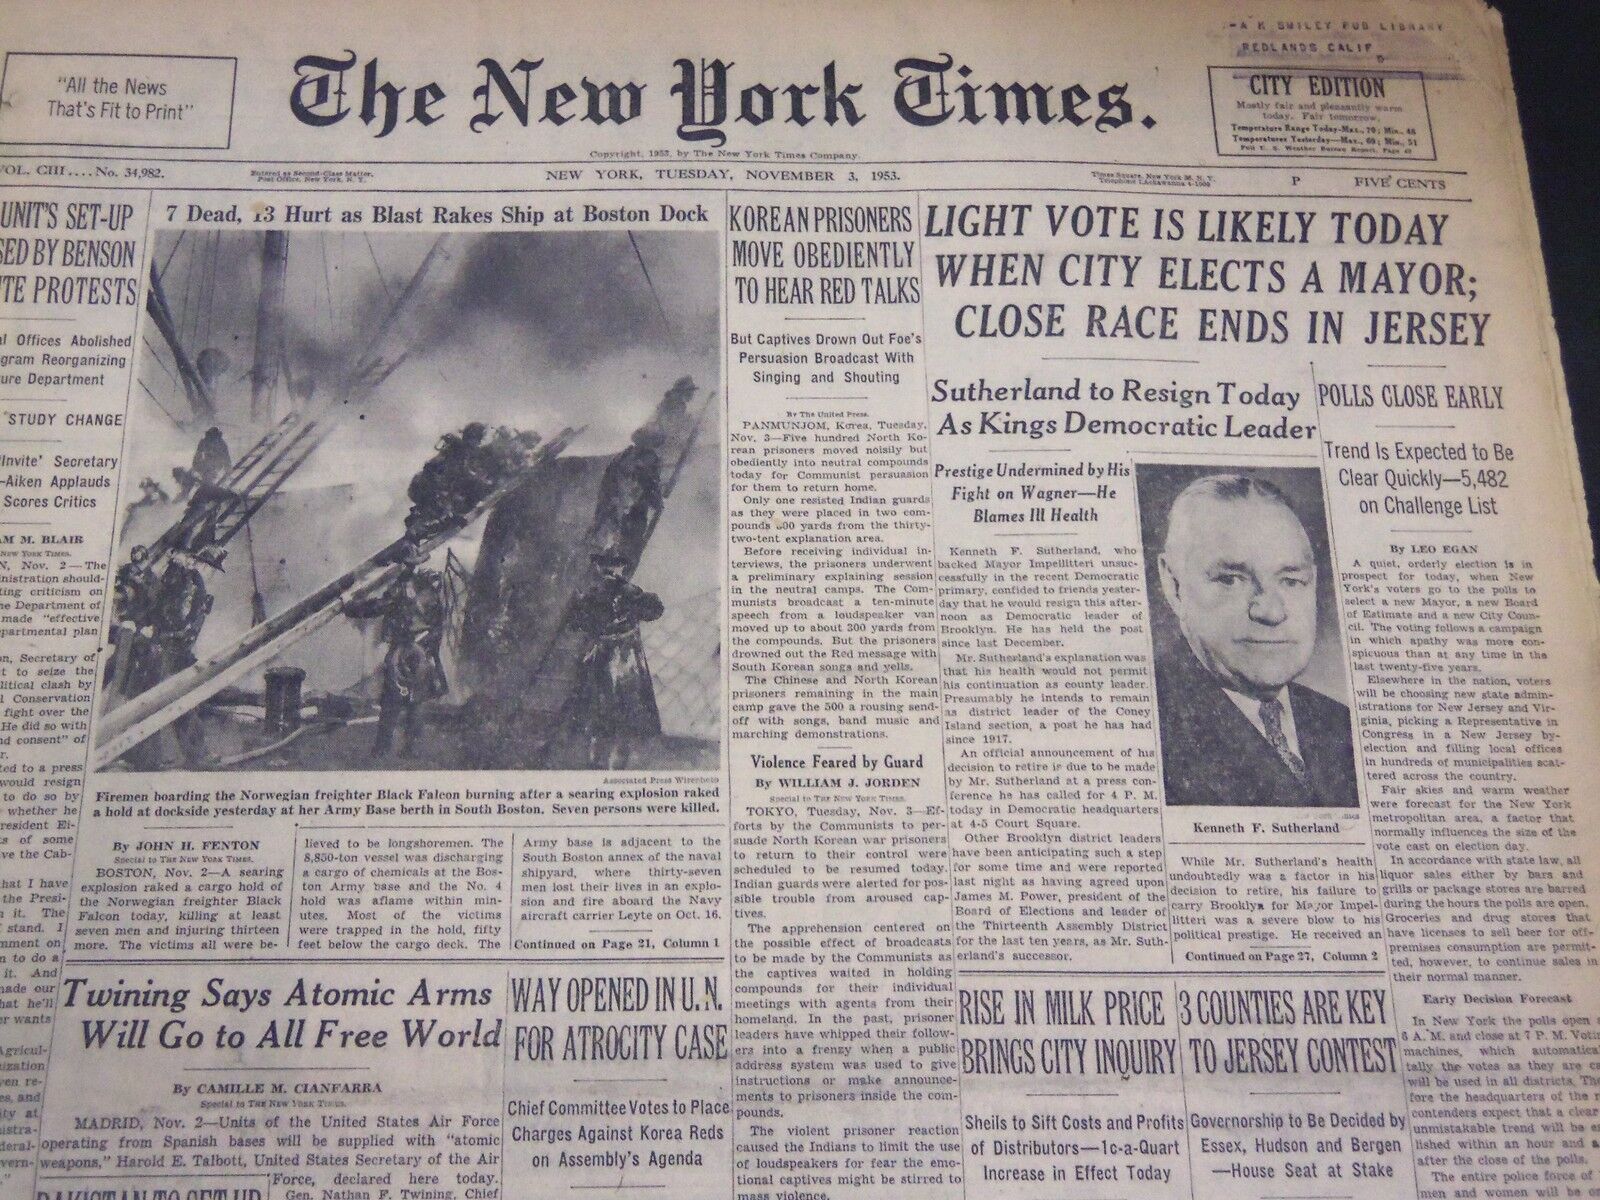 1953 NOVEMBER 3 NEW YORK TIMES - LIGHT VOTE LIKELY AS CITY ELECTS MAYOR- NT 4660